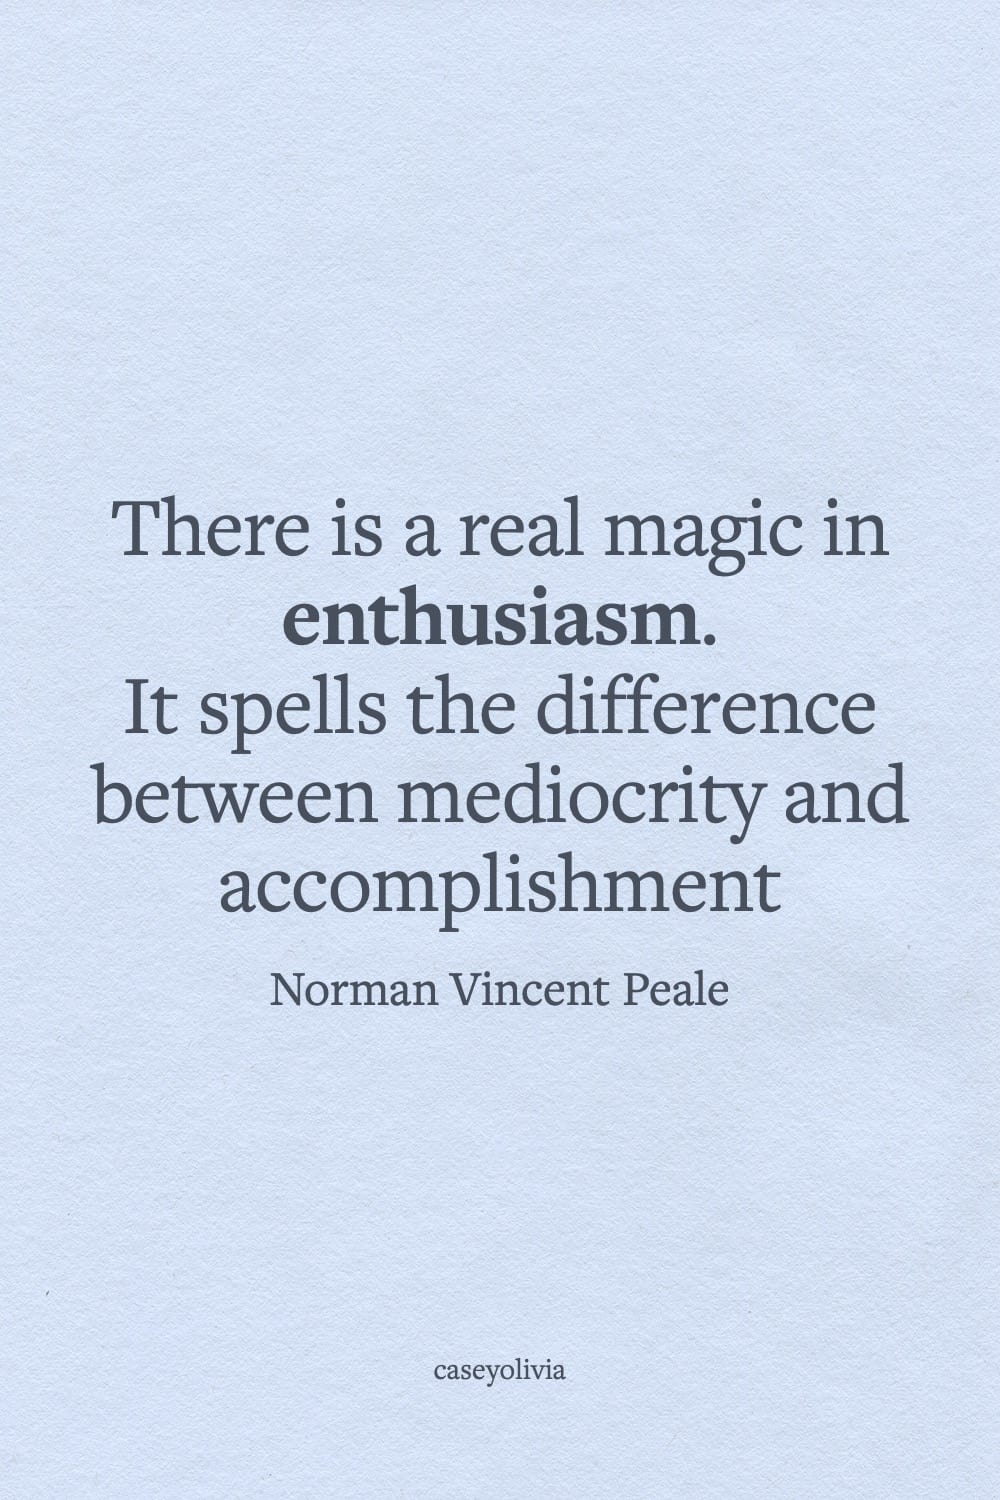 norman vincent peale real magic in enthusiasm quote